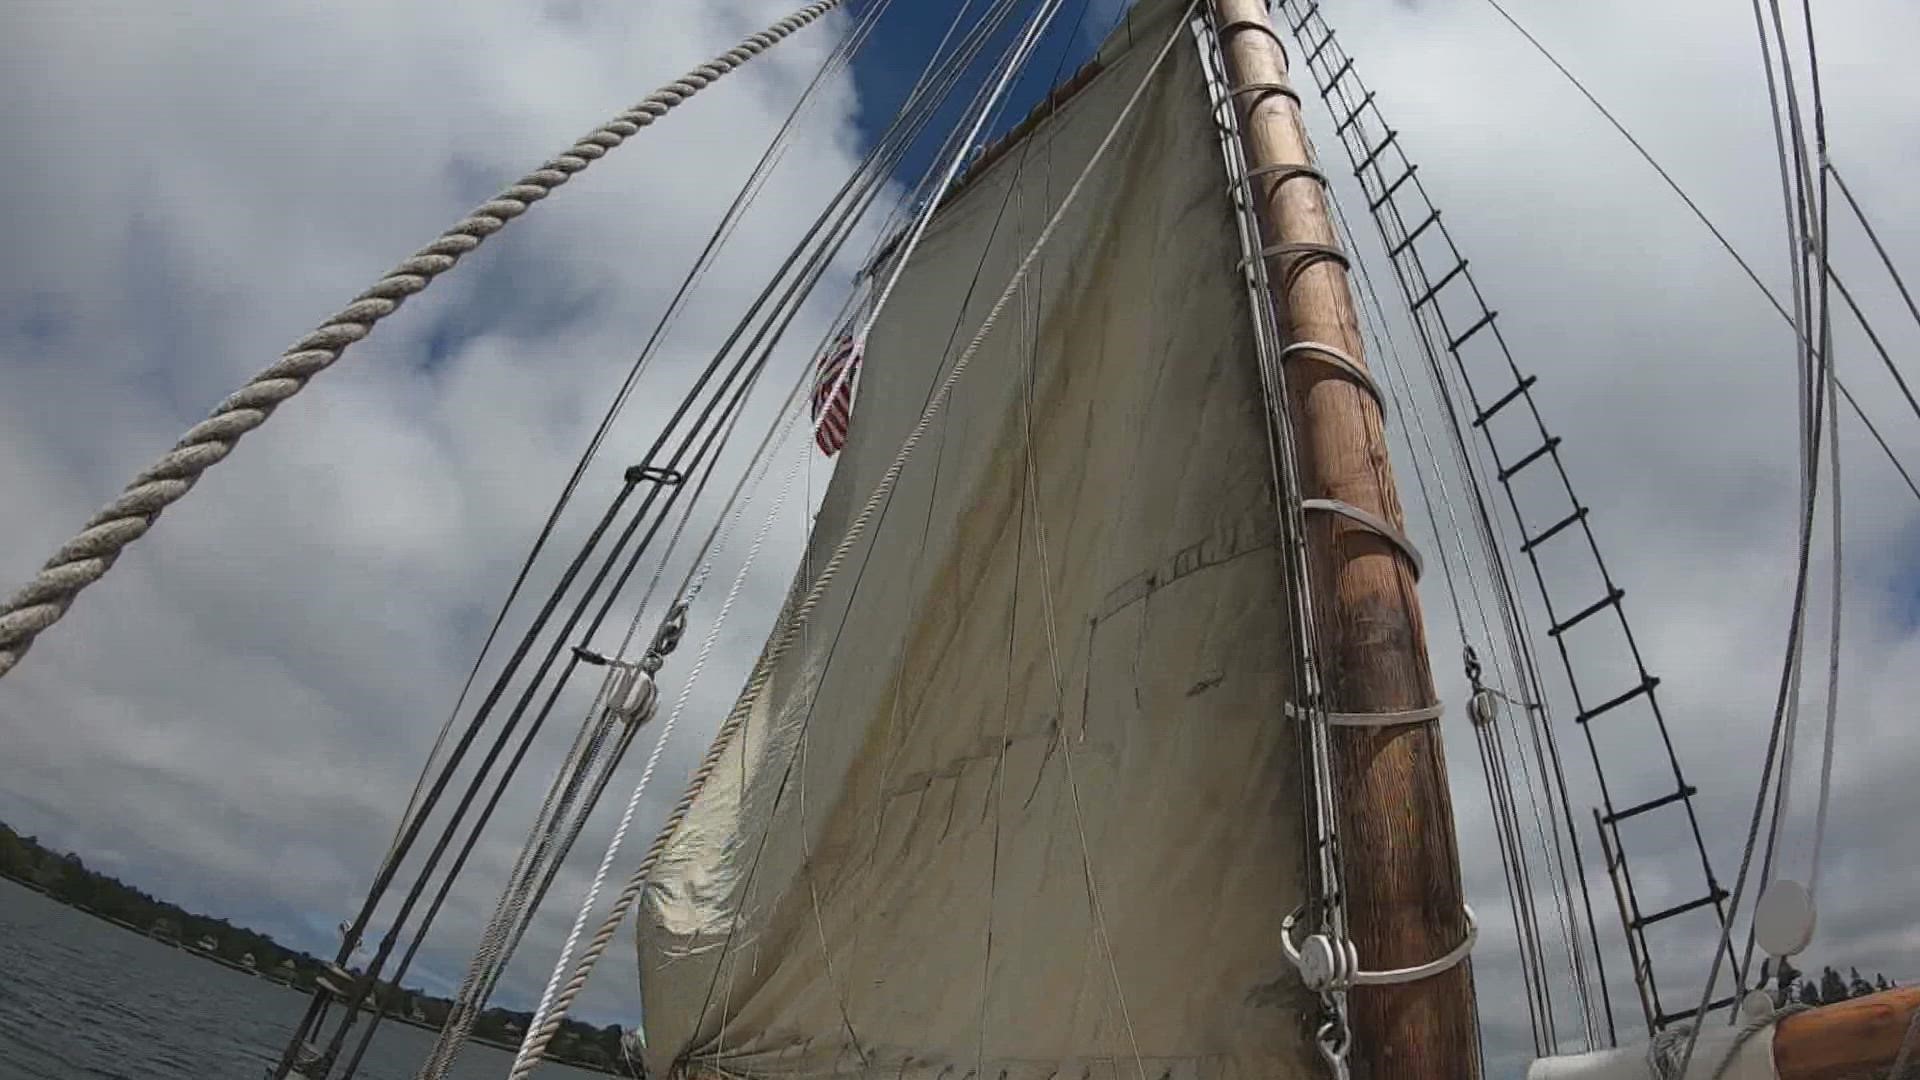 Josh Jacques and his partner Jessica Kelley bought the 136-year-old windjammer last year together from the owner of the Boothbay Harbor Shipyard.